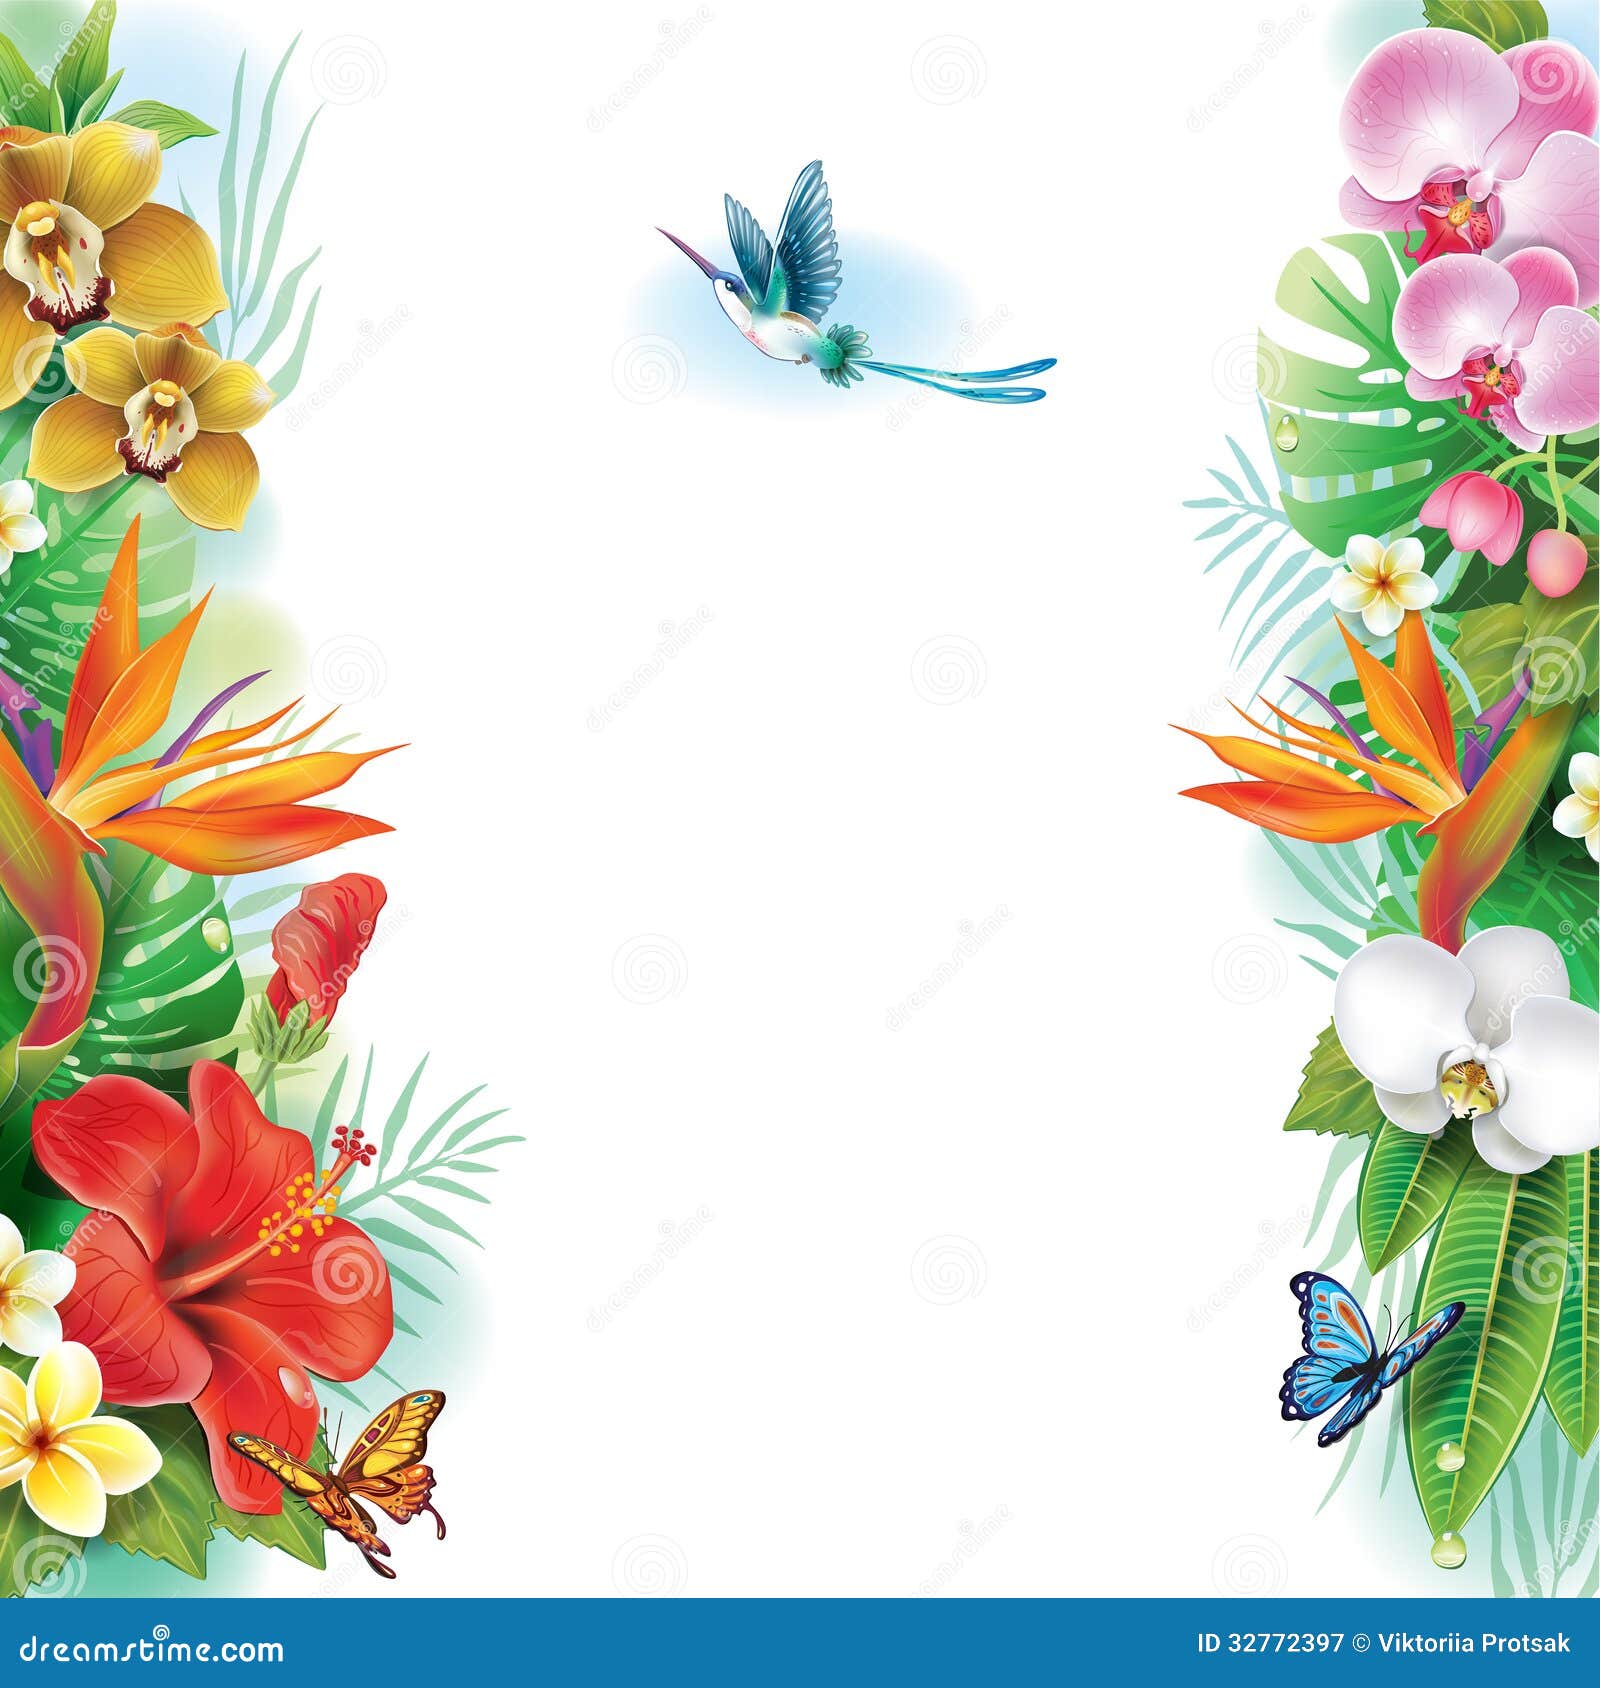 Border From Tropical Flowers And Leaves Royalty Free Stock Photography